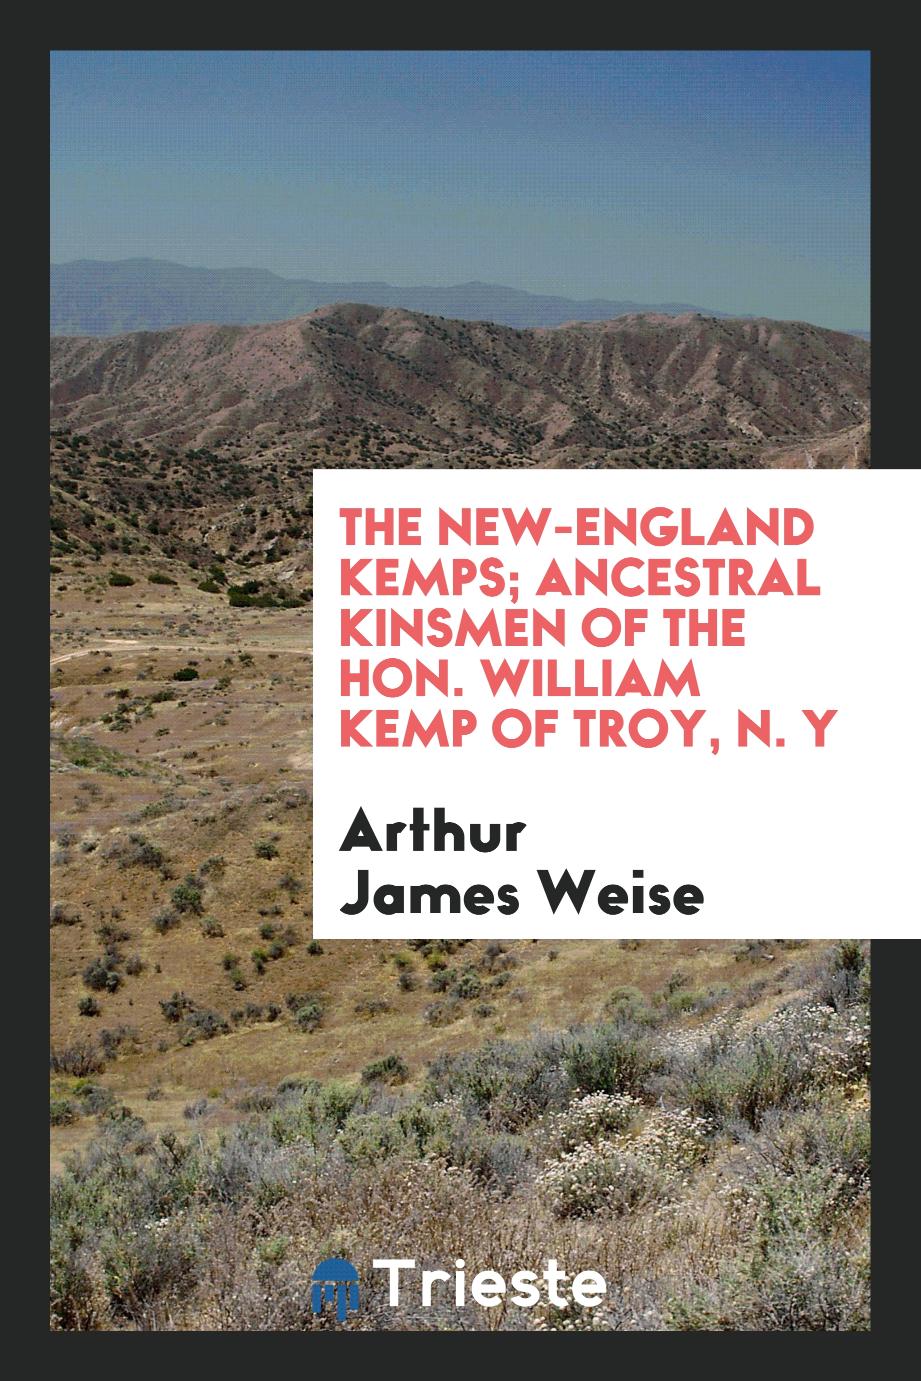 The New-England Kemps; ancestral kinsmen of the Hon. William Kemp of Troy, N. Y